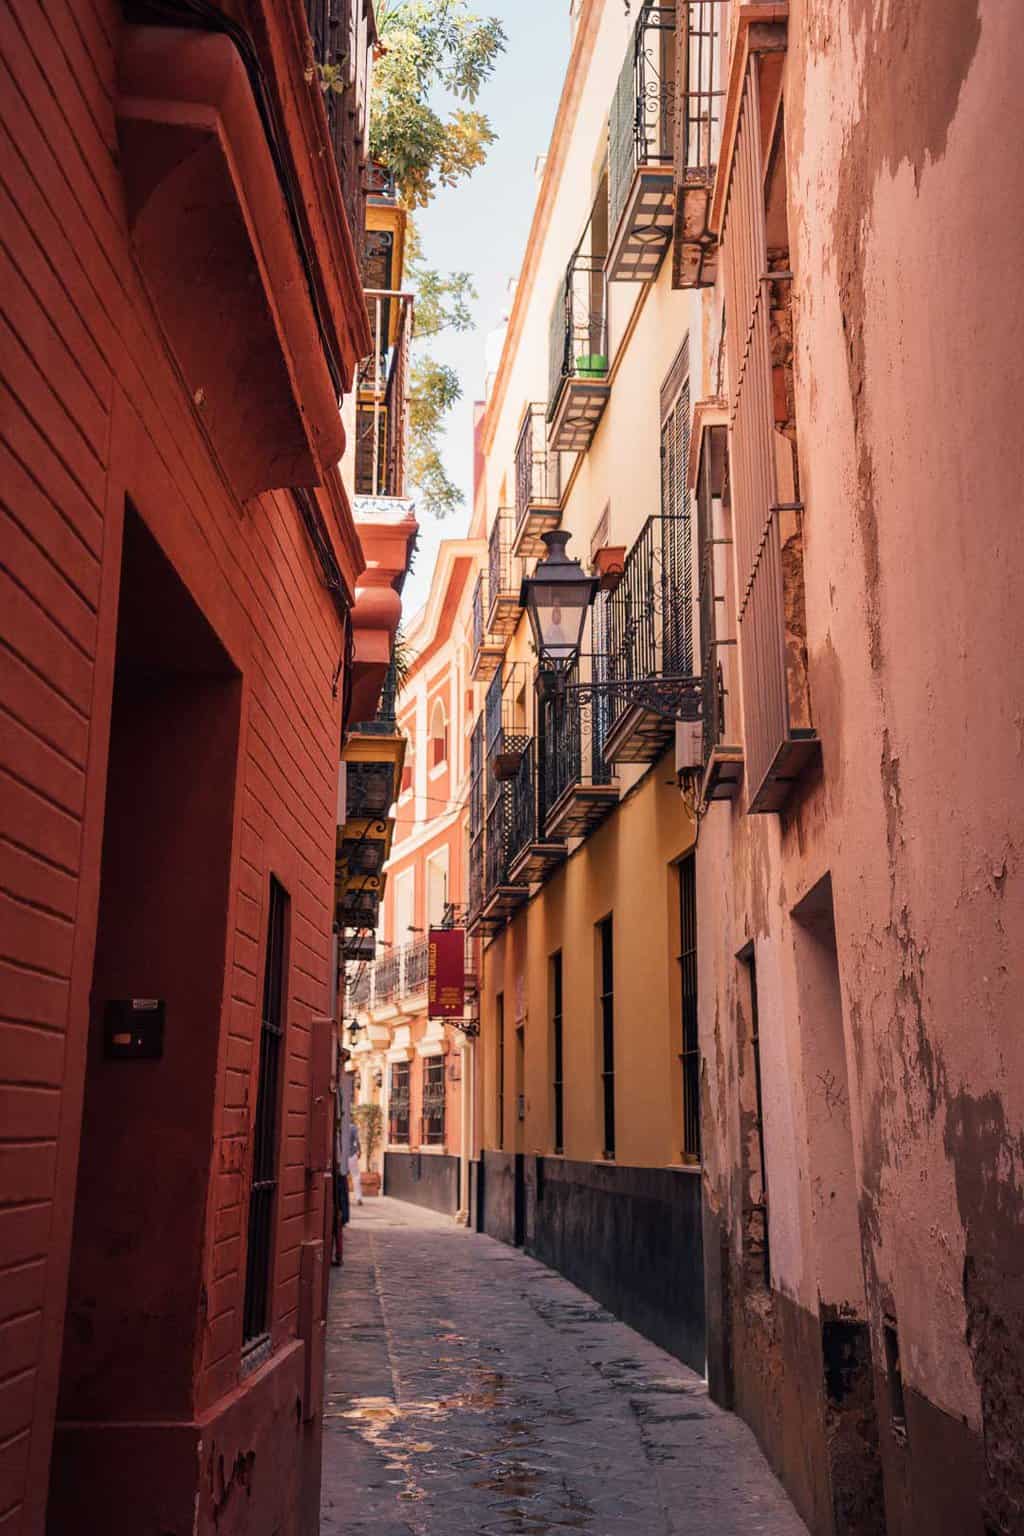 The atmospheric narrow red and yellow streets of Barrios Santa Cruz in Seville.